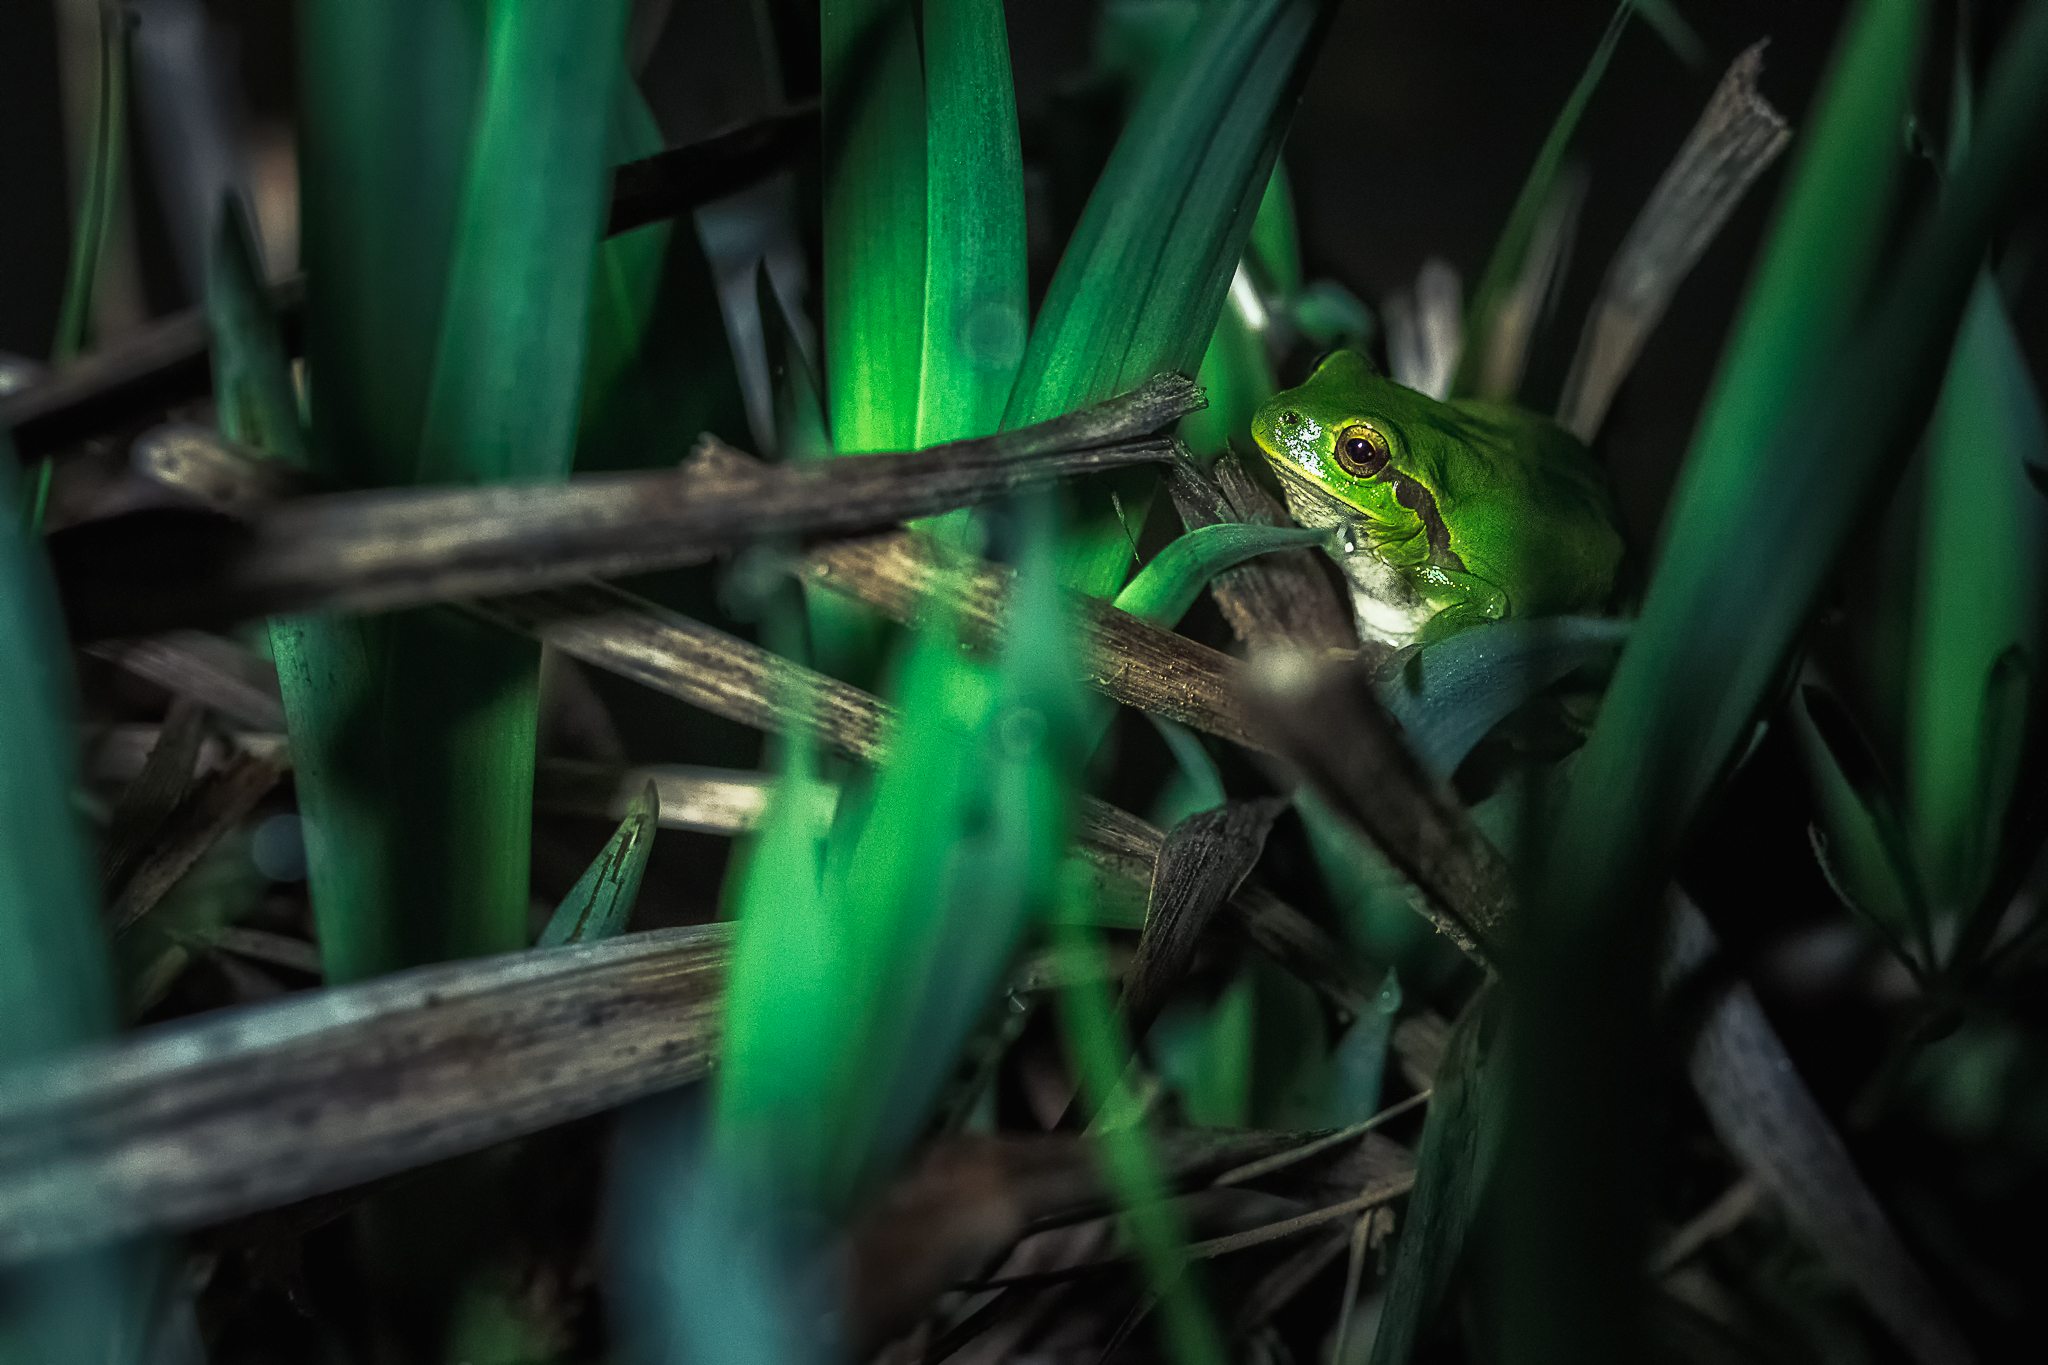 Tree frog in the night...